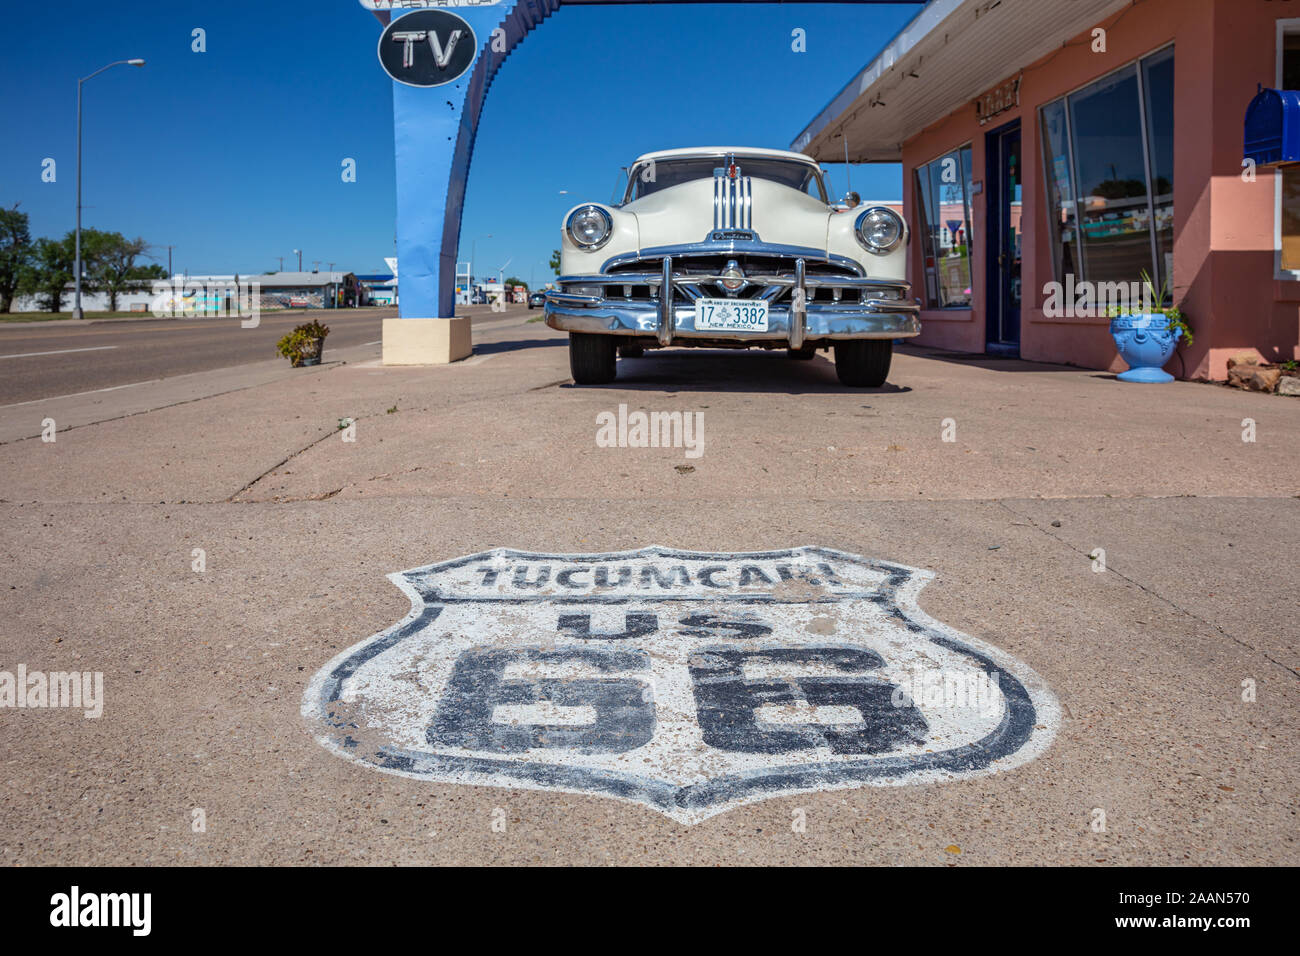 Tucumcari, New Mexico, USA. May 14, 2019. Worn out stamp of mother road, route 66, on the pavement. An antique pontiac car is parked at the entrance o Stock Photo